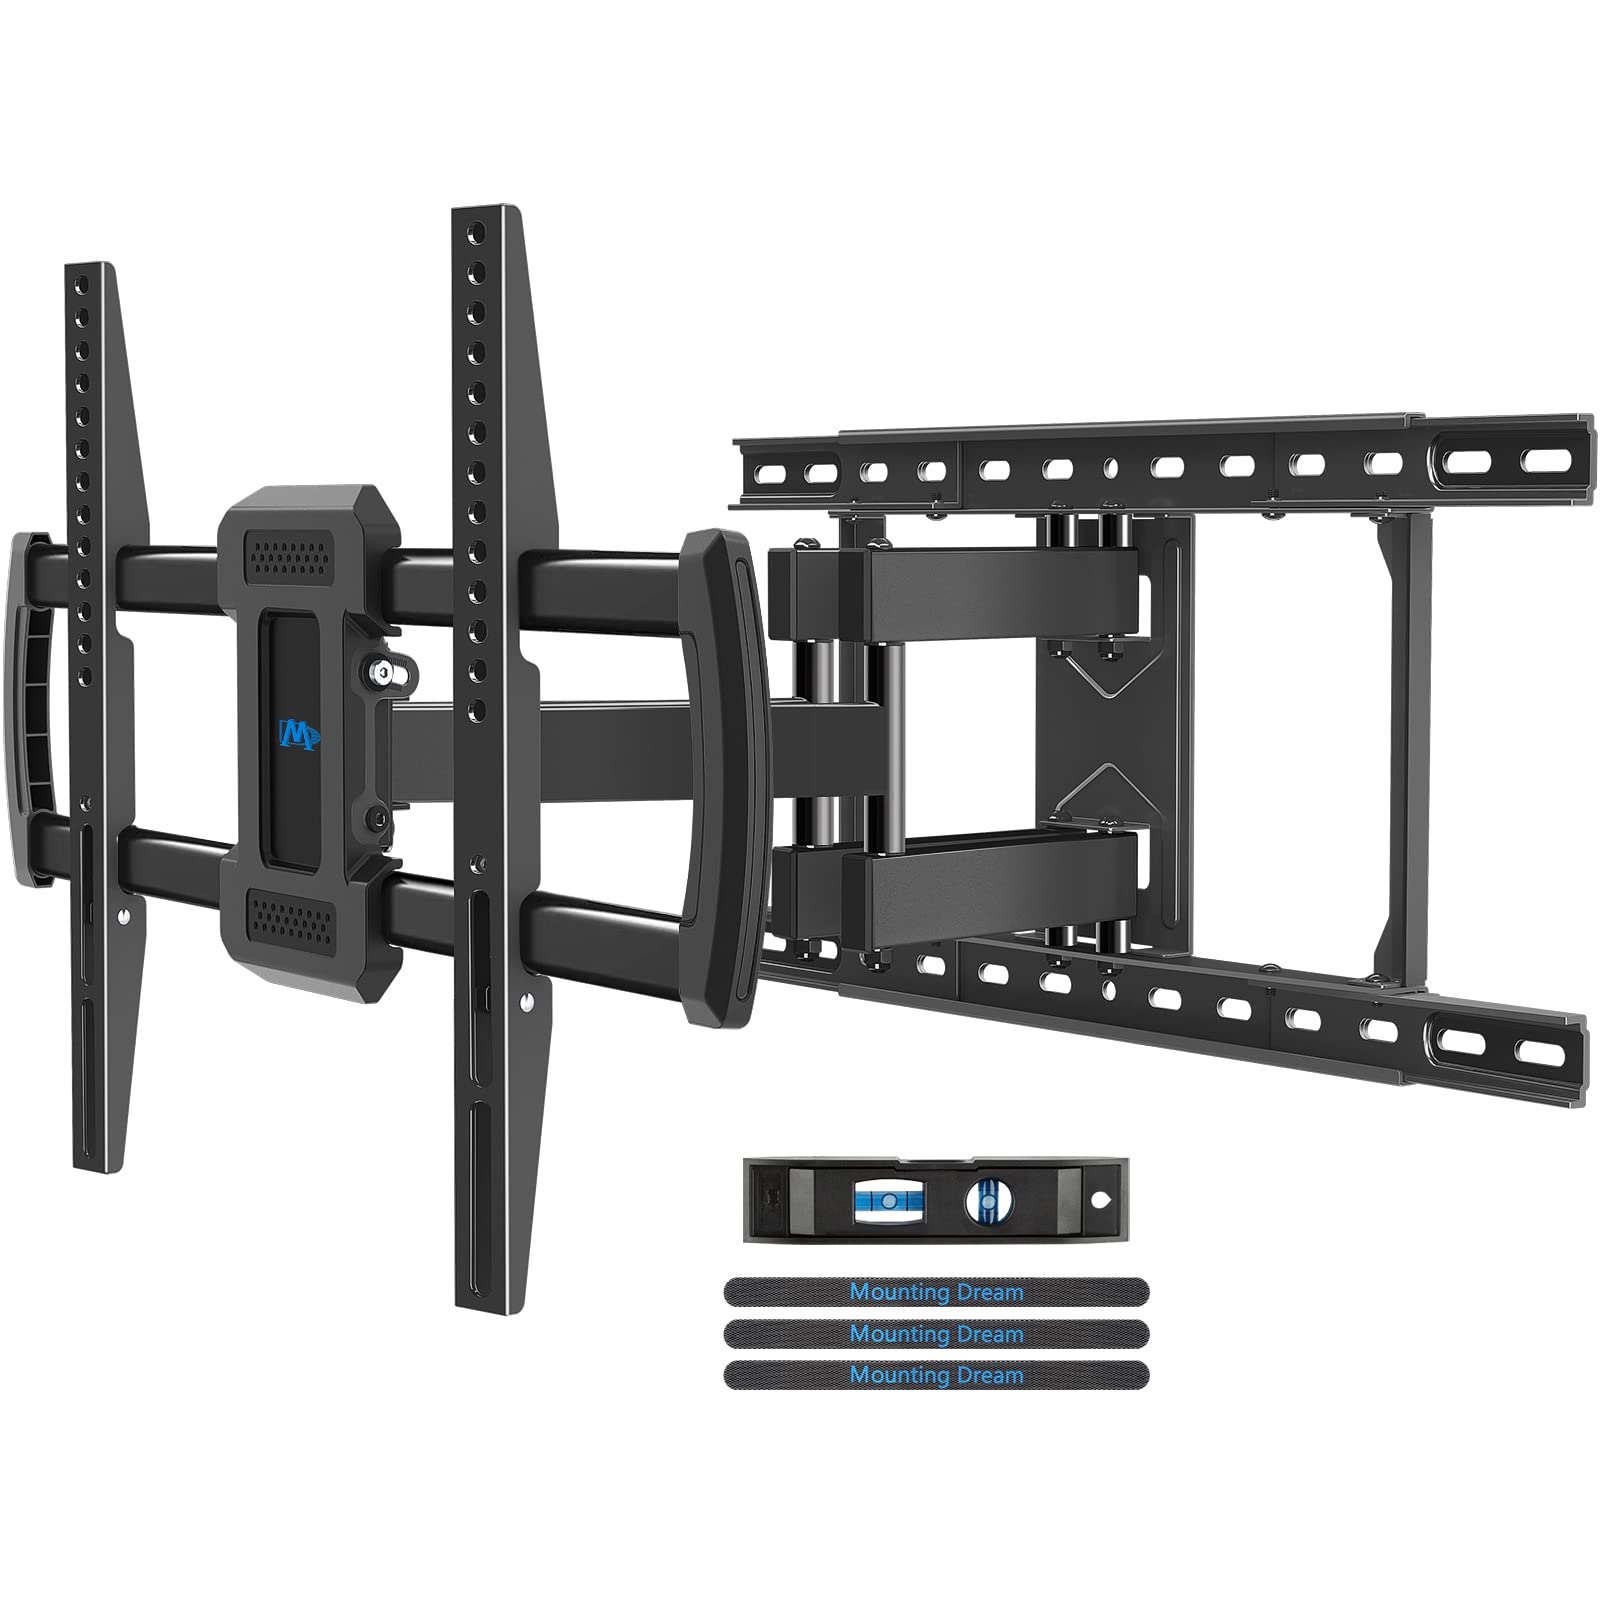 Mounting Dream TV Wall Mounts TV Bracket for Most 42-70 Inch TVs, UL Listed Premium TV Mount Full Motion with Articulating Arms, Max VESA 600x400mm and 100LBS, Fits 16